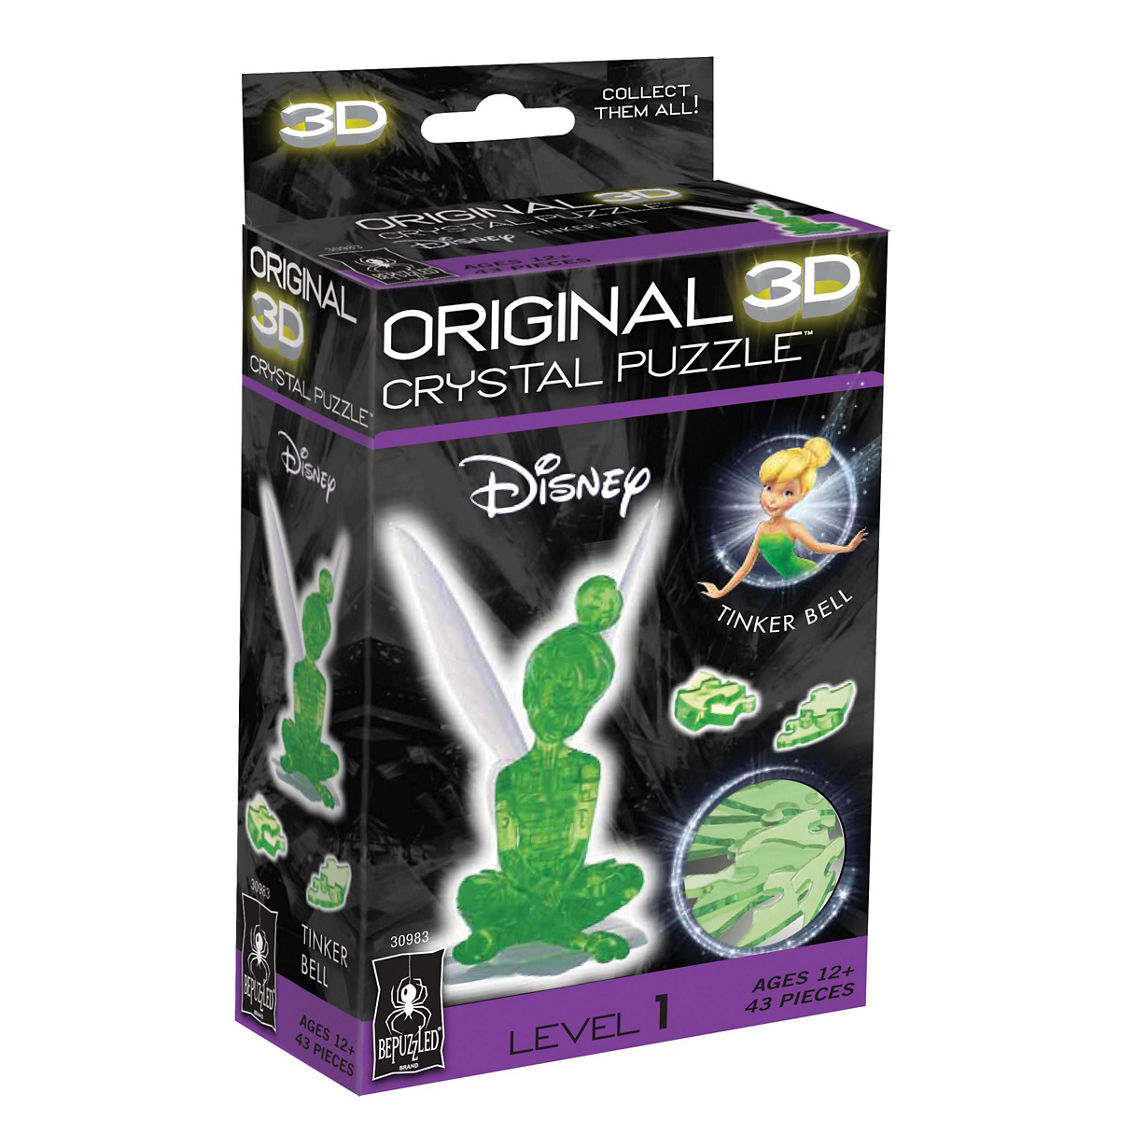 BePuzzled 3D Crystal Puzzle - Disney Tinker Bell: 43 Pcs - Image 2 of 3